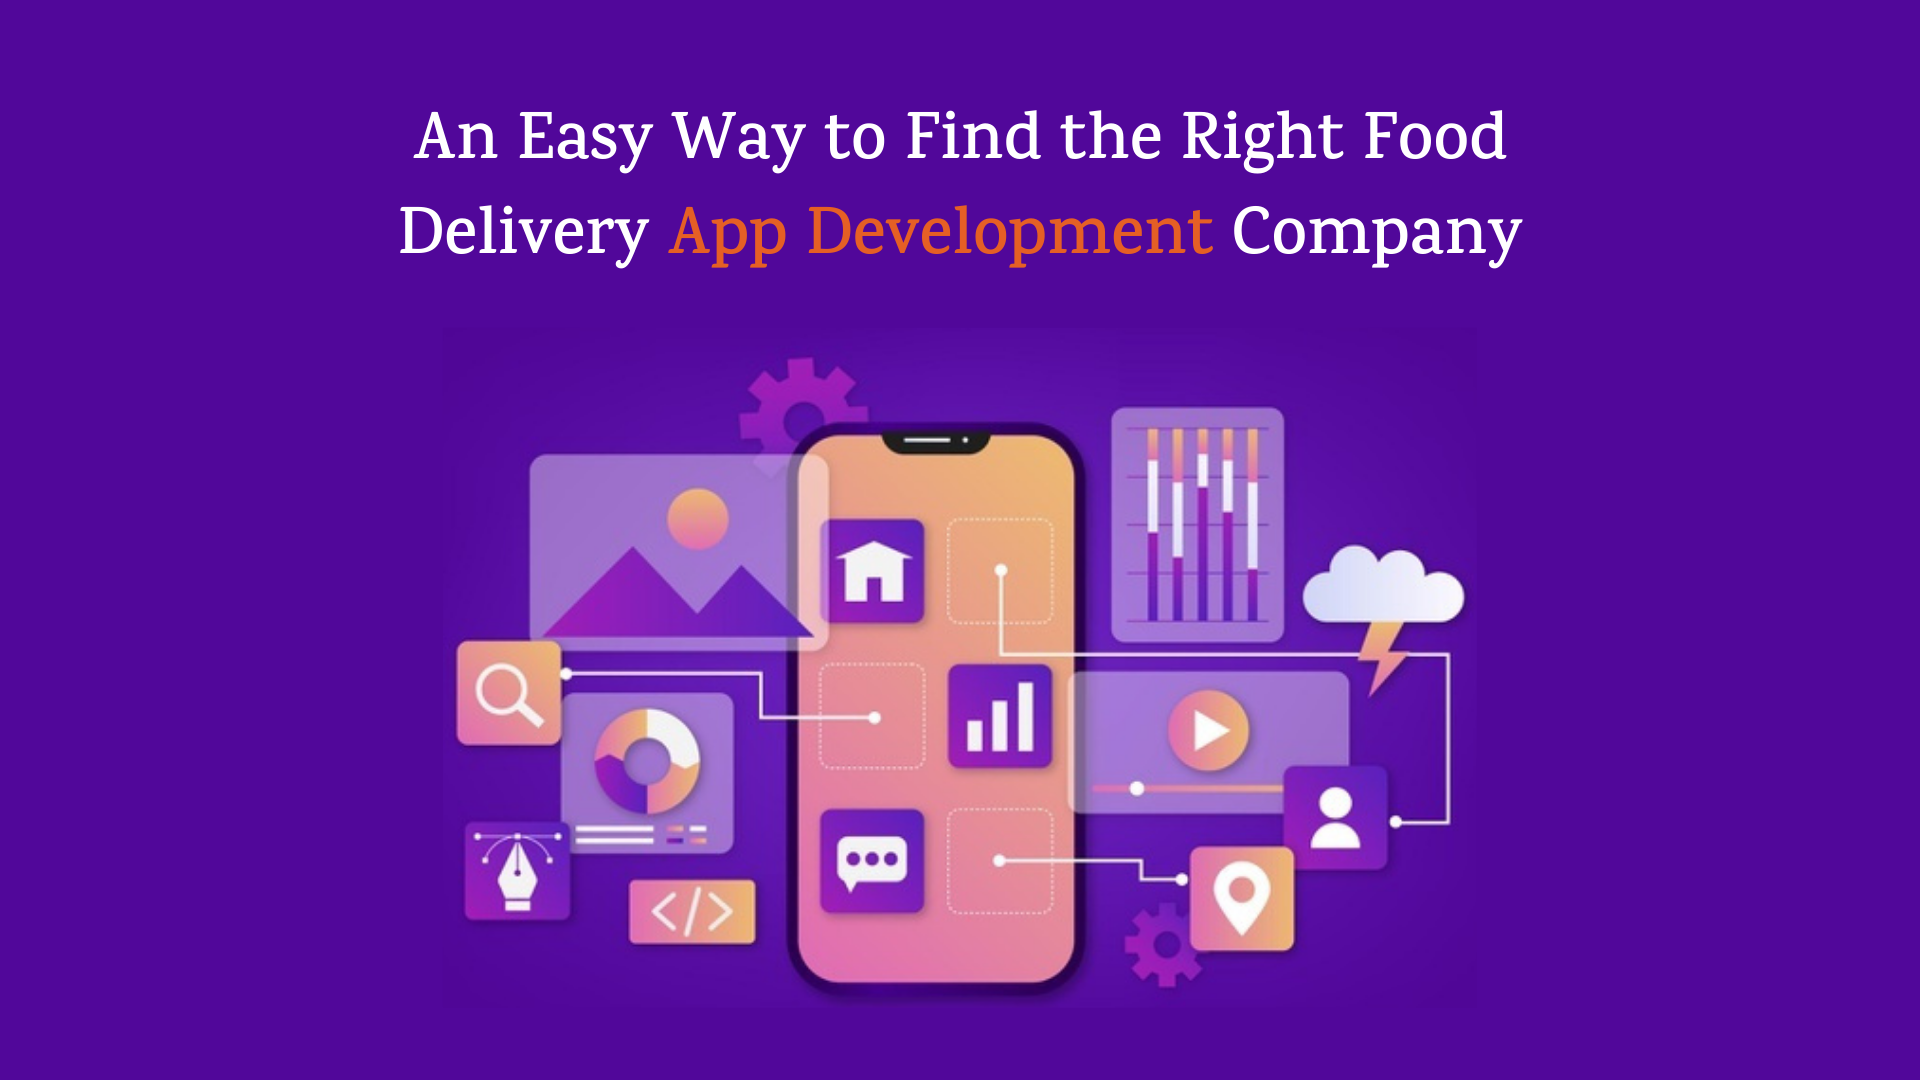 An Easy Way to Find the Right Food Delivery App Development Company